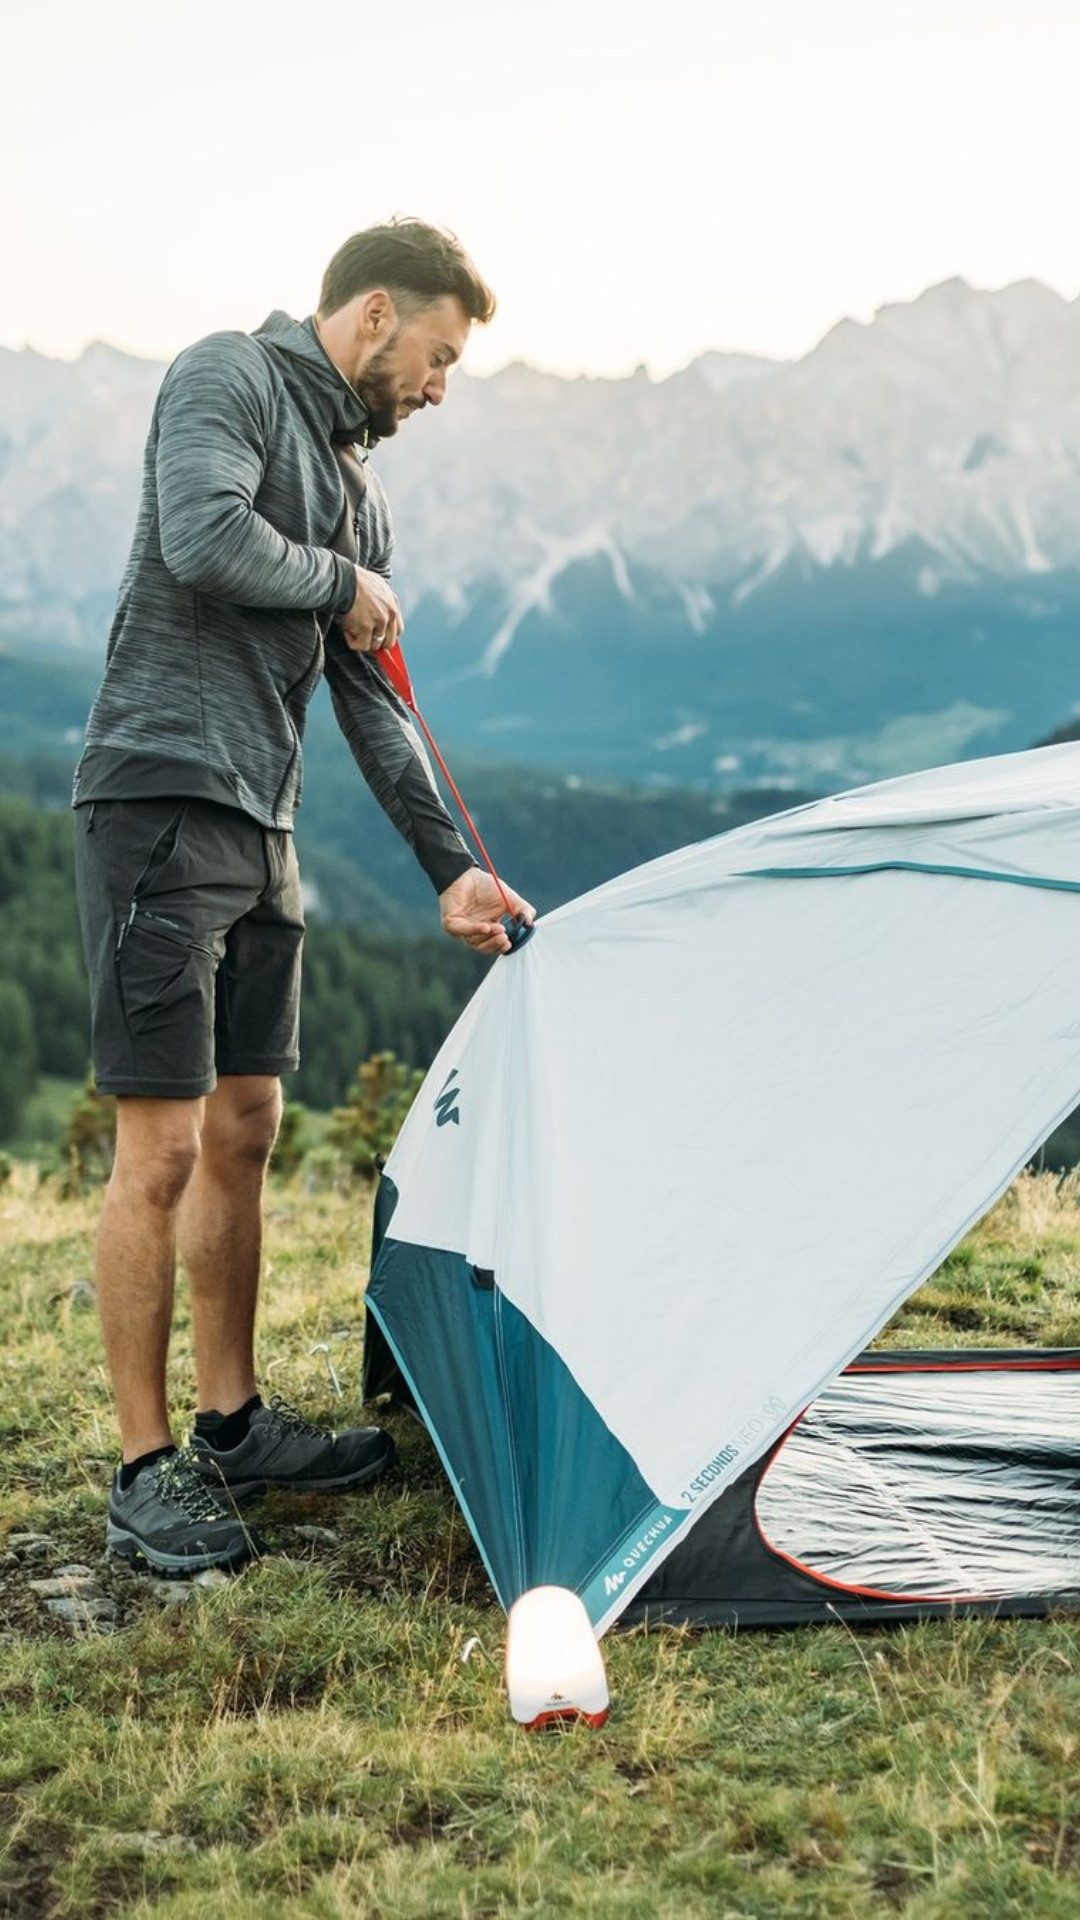 image of a man setting up a tent